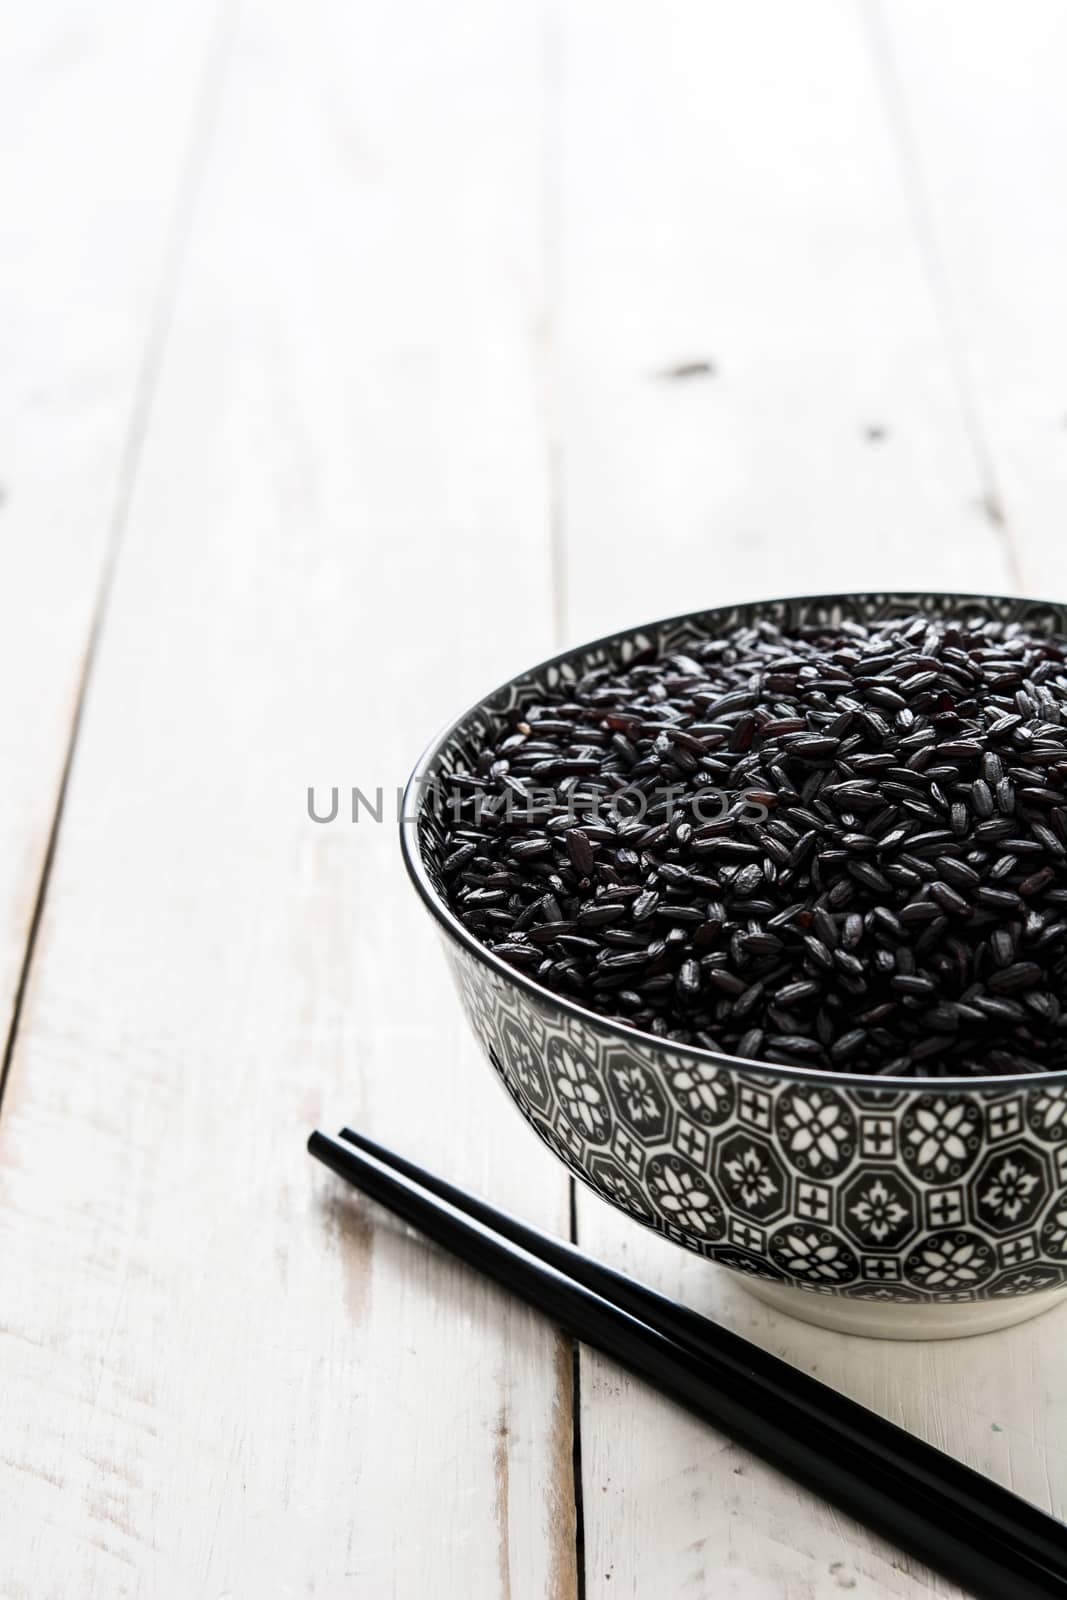 Raw black rice on white wooden background by chandlervid85